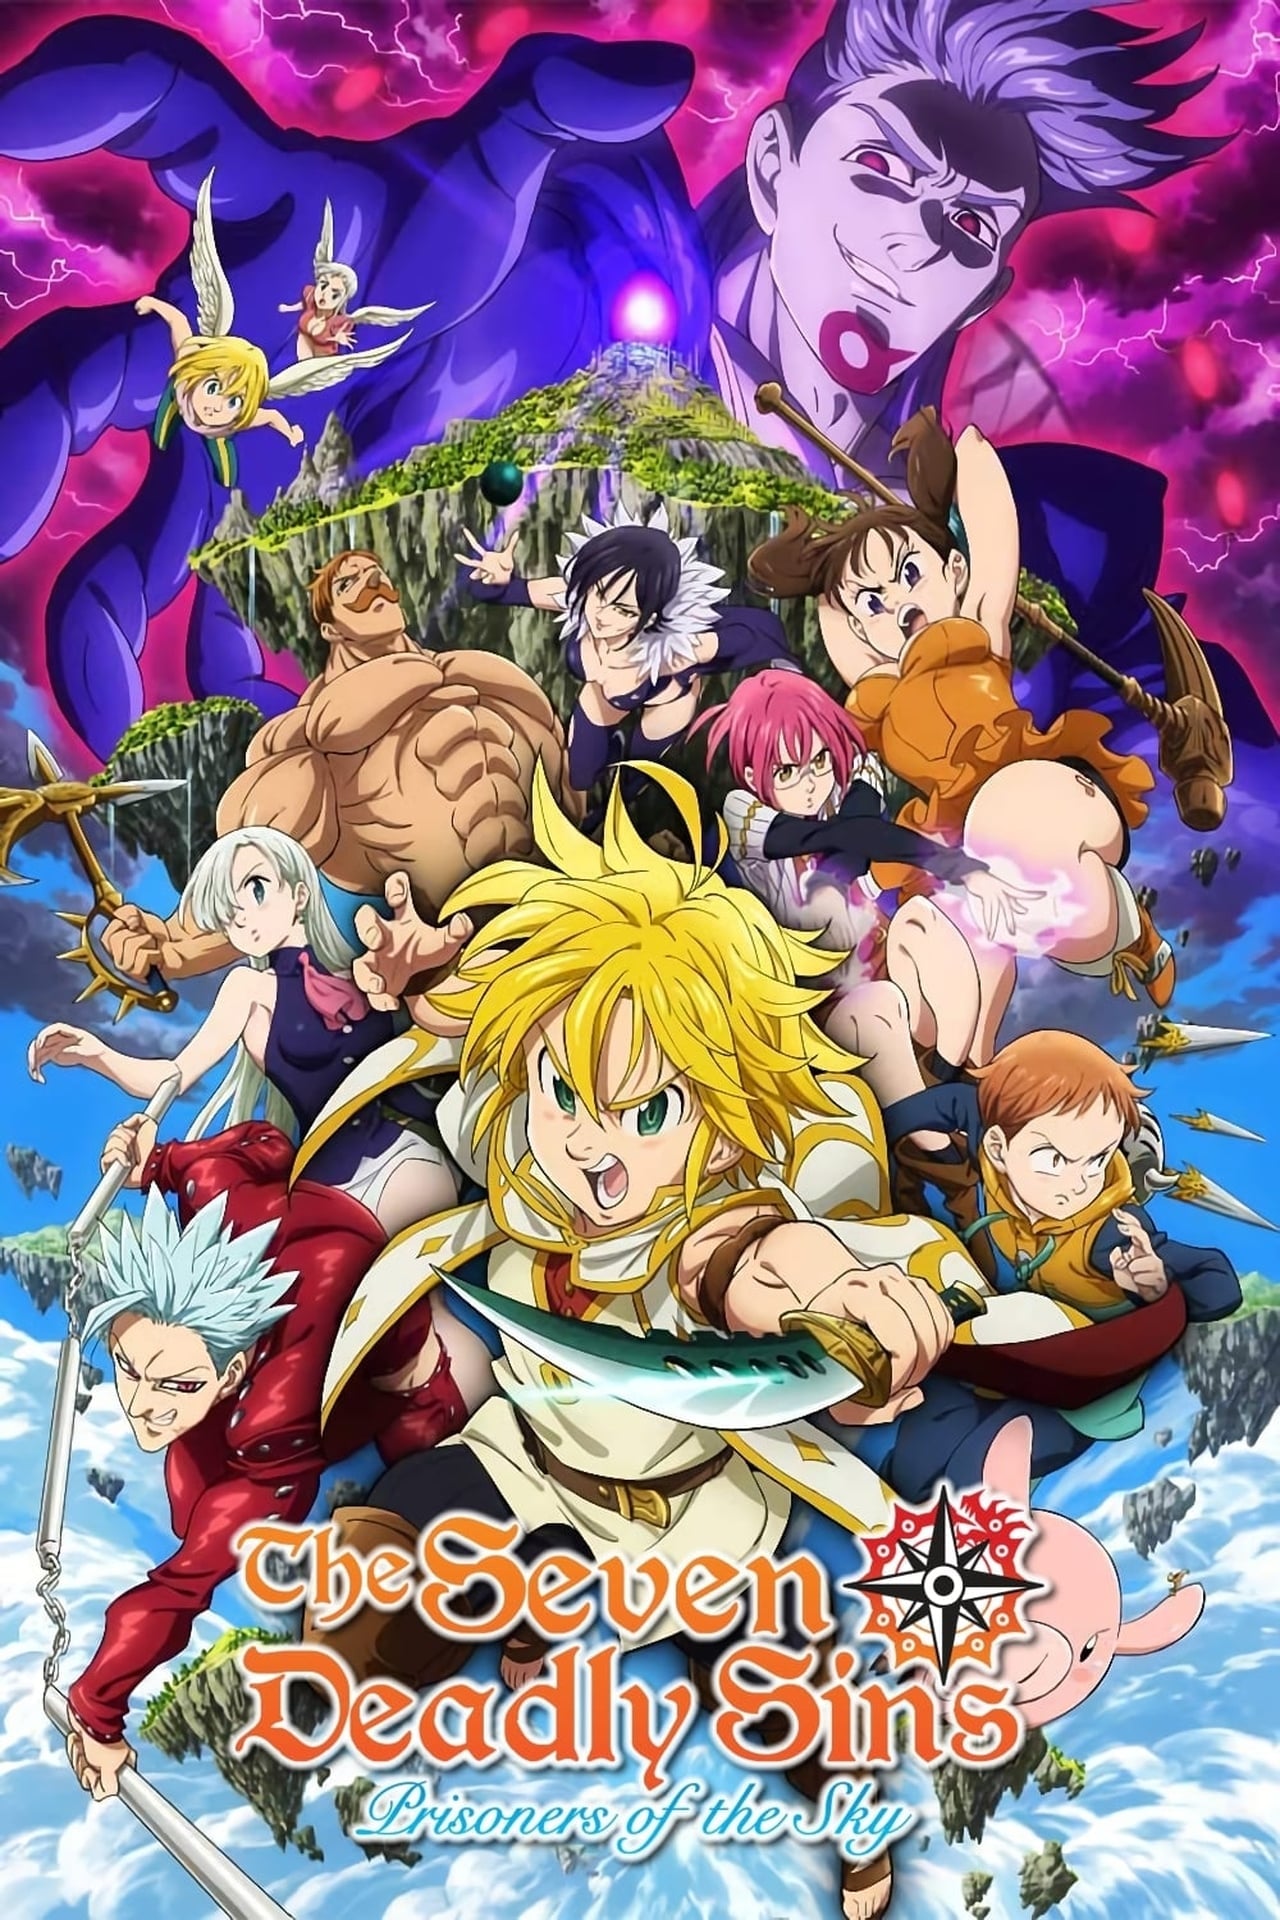 Caratula de 劇場版 七つの大罪 天空の囚われ人 (The Seven Deadly Sins: Prisoners of the Sky) 